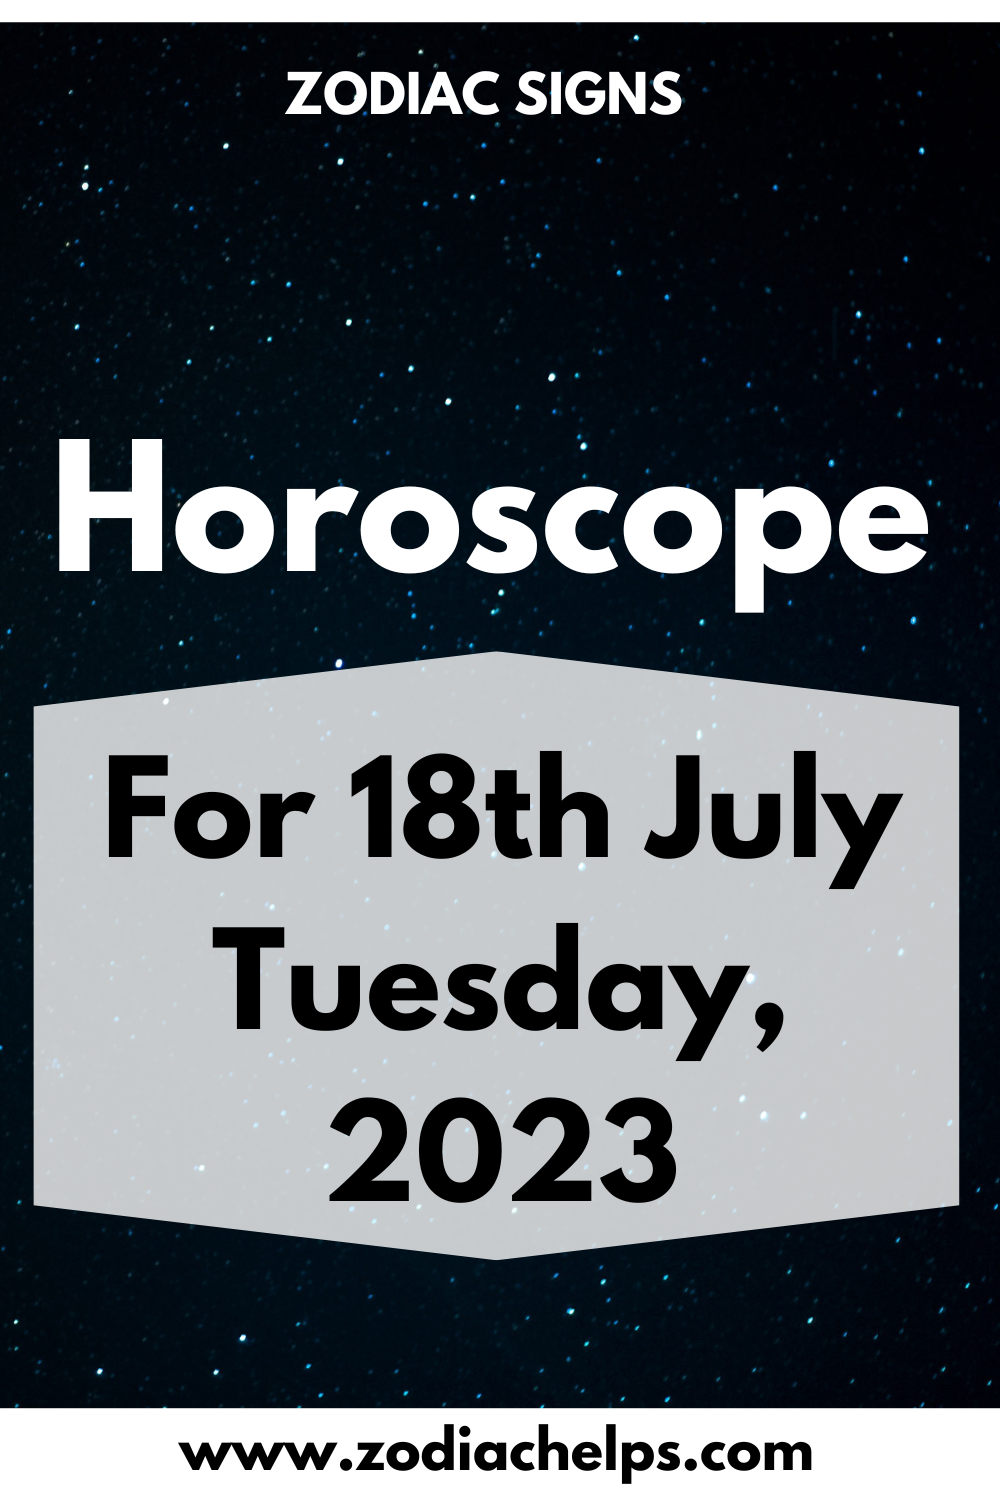 Horoscope for 18th July Tuesday, 2023